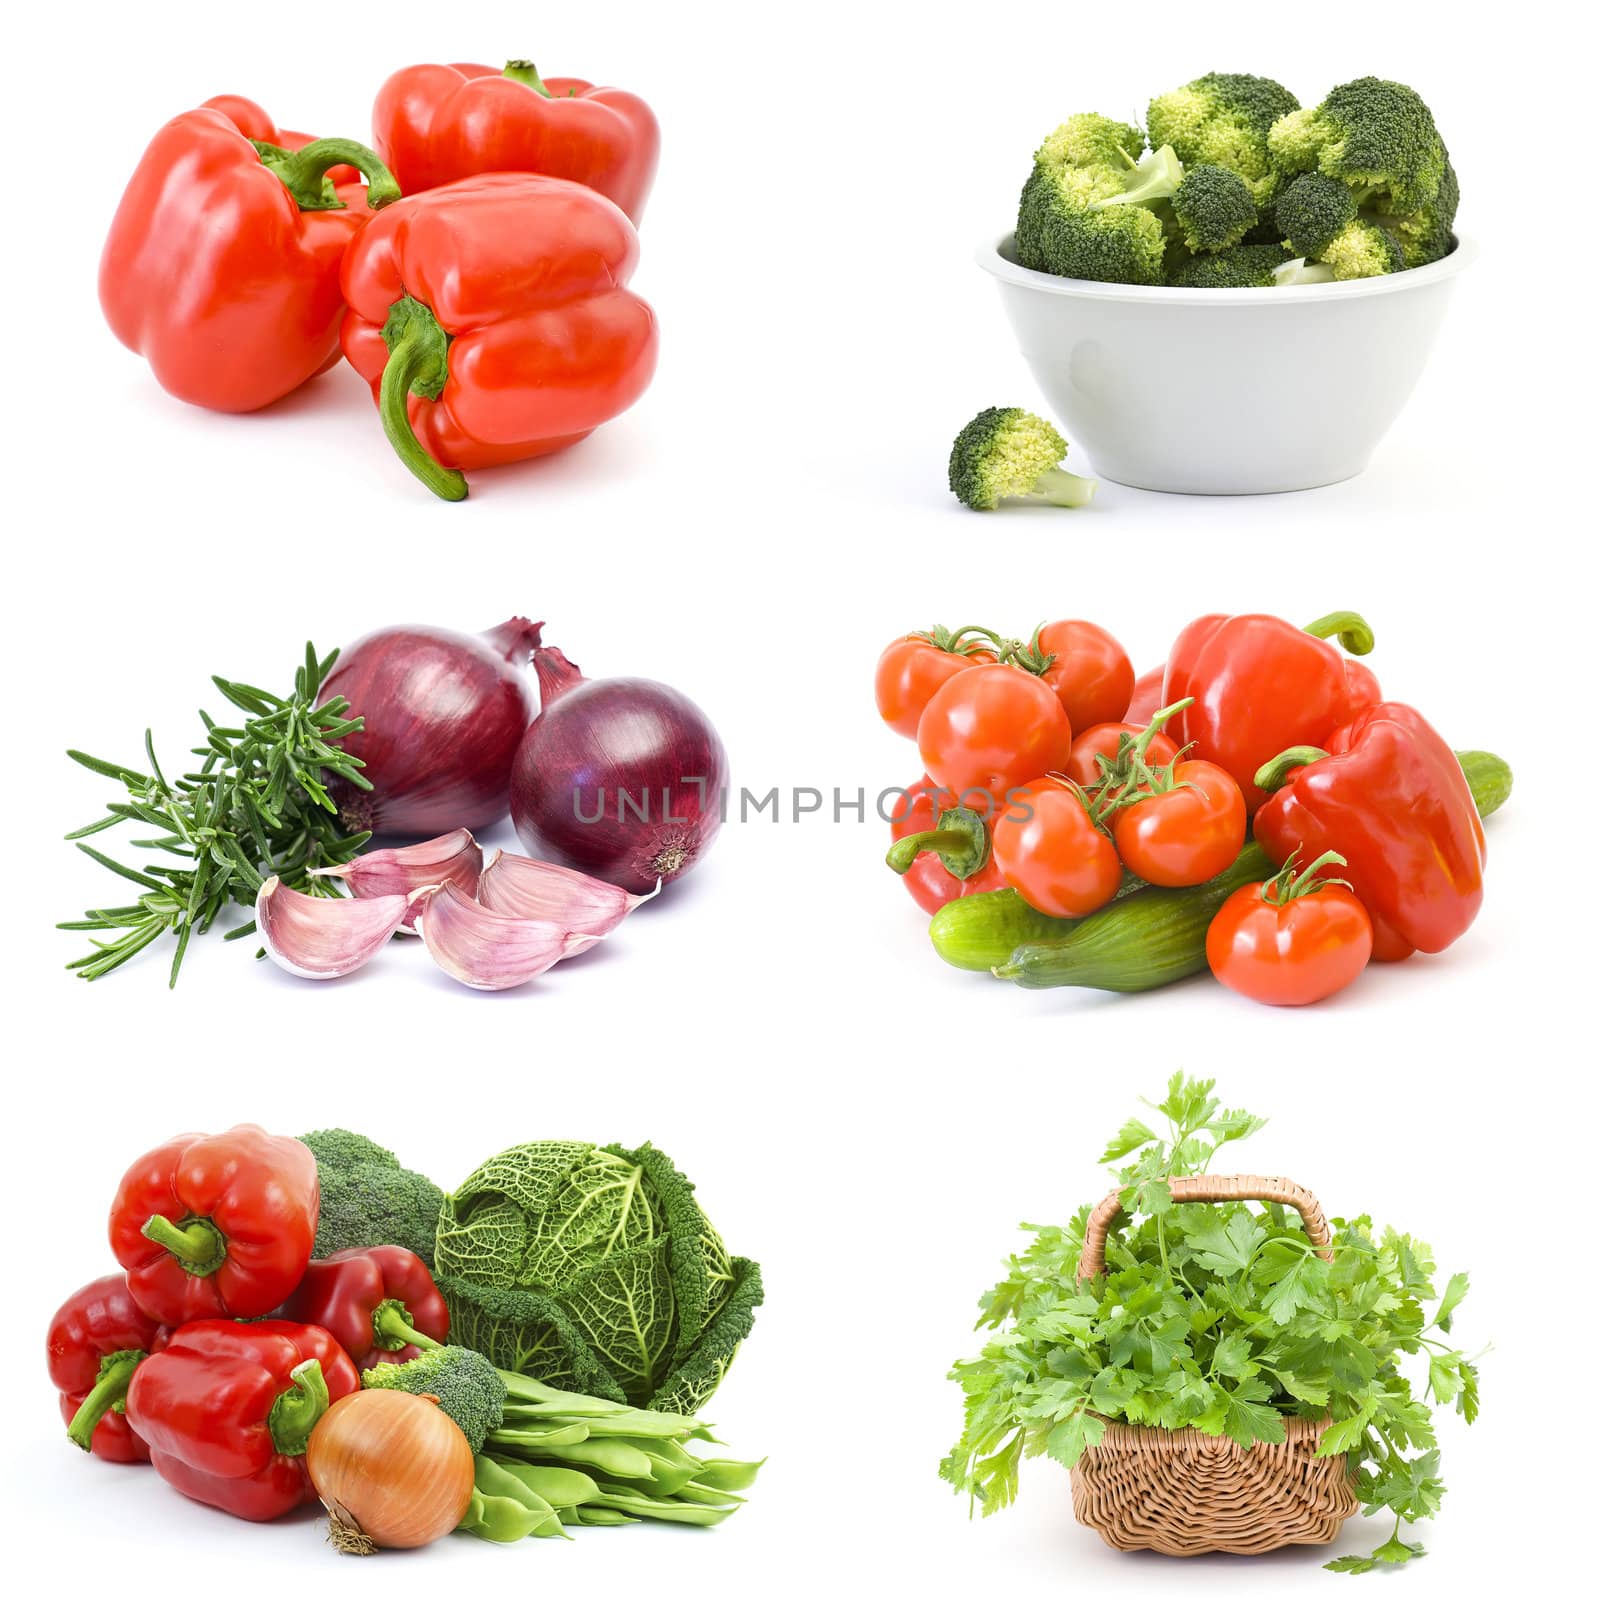 collection of images on the theme of "vegetables"